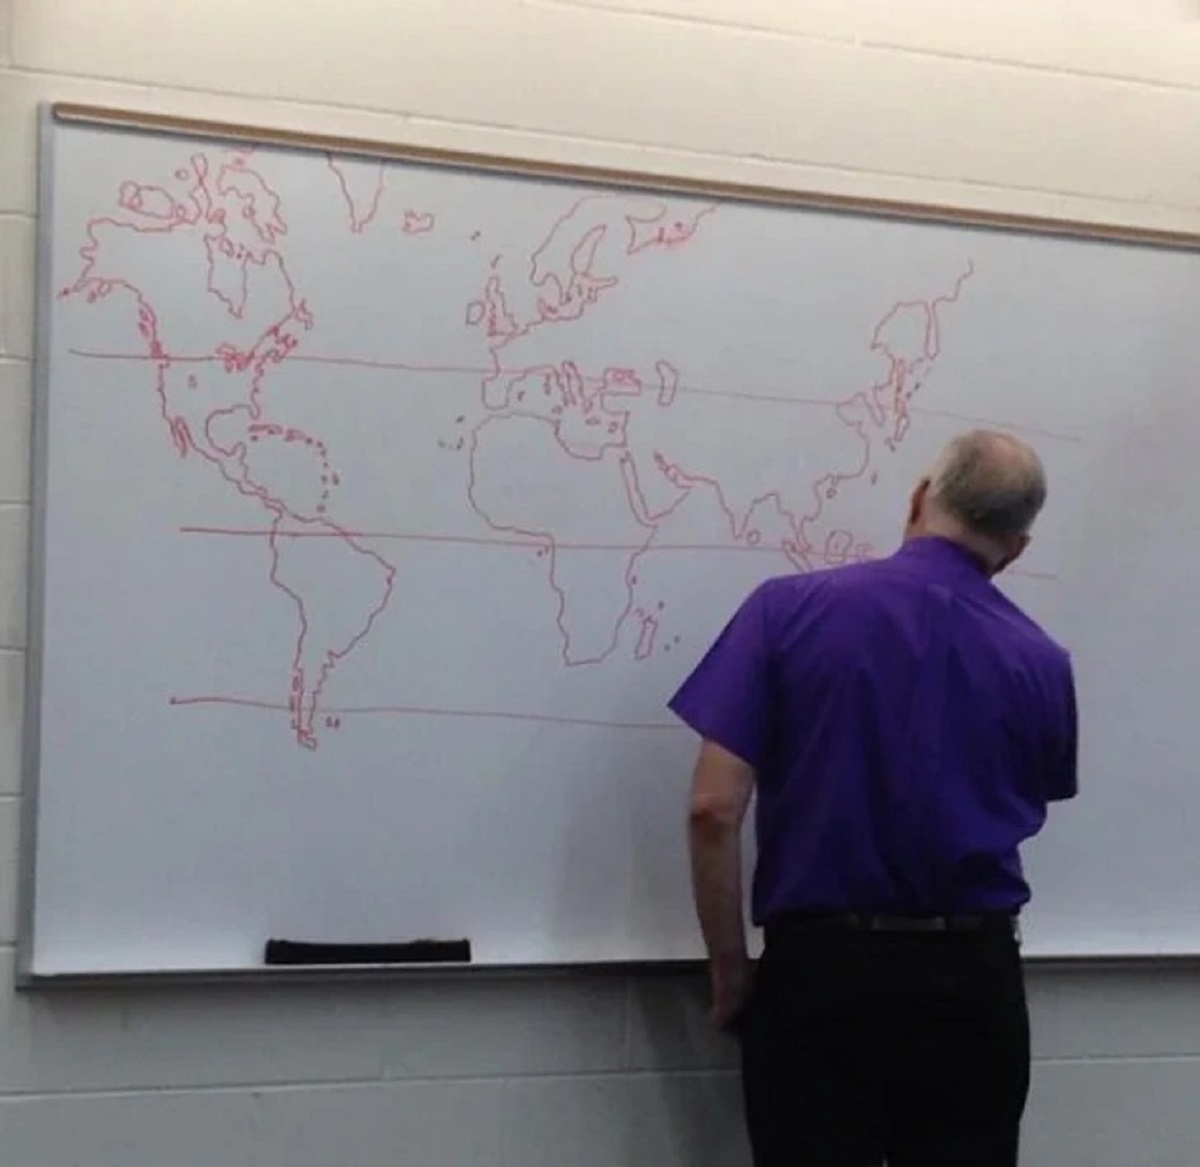 “My professor in college drew a map of the entire world from memory.”